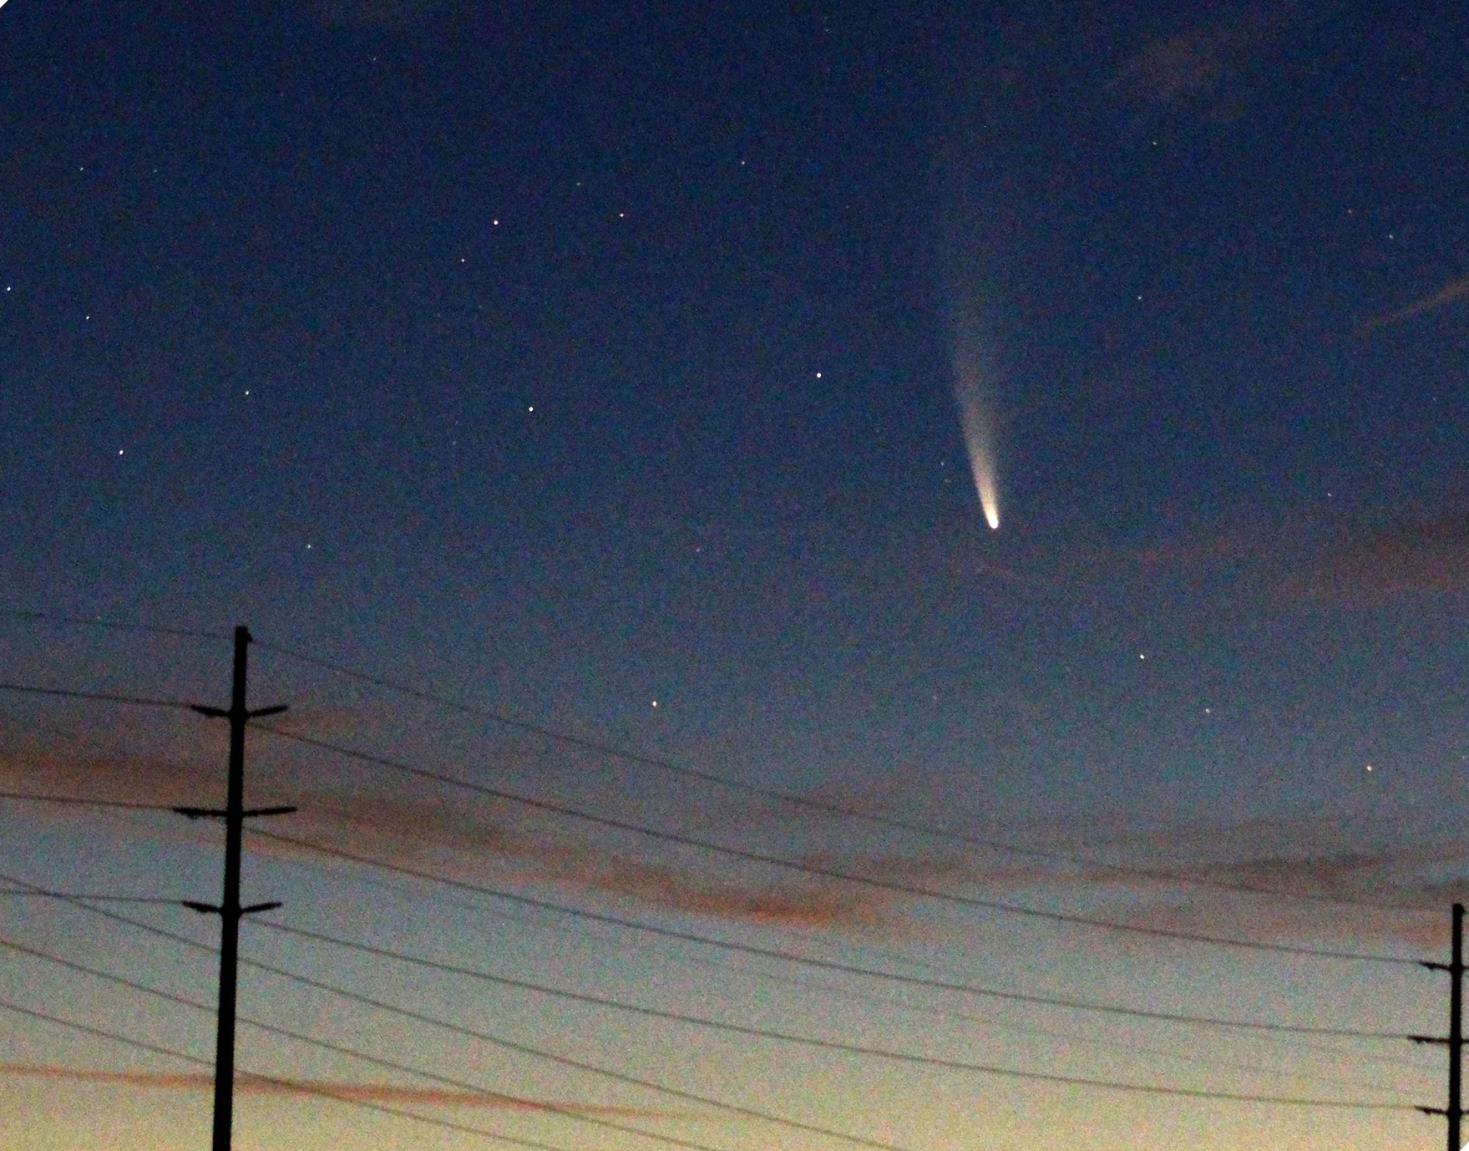 How Do Comets Get Their Tails?